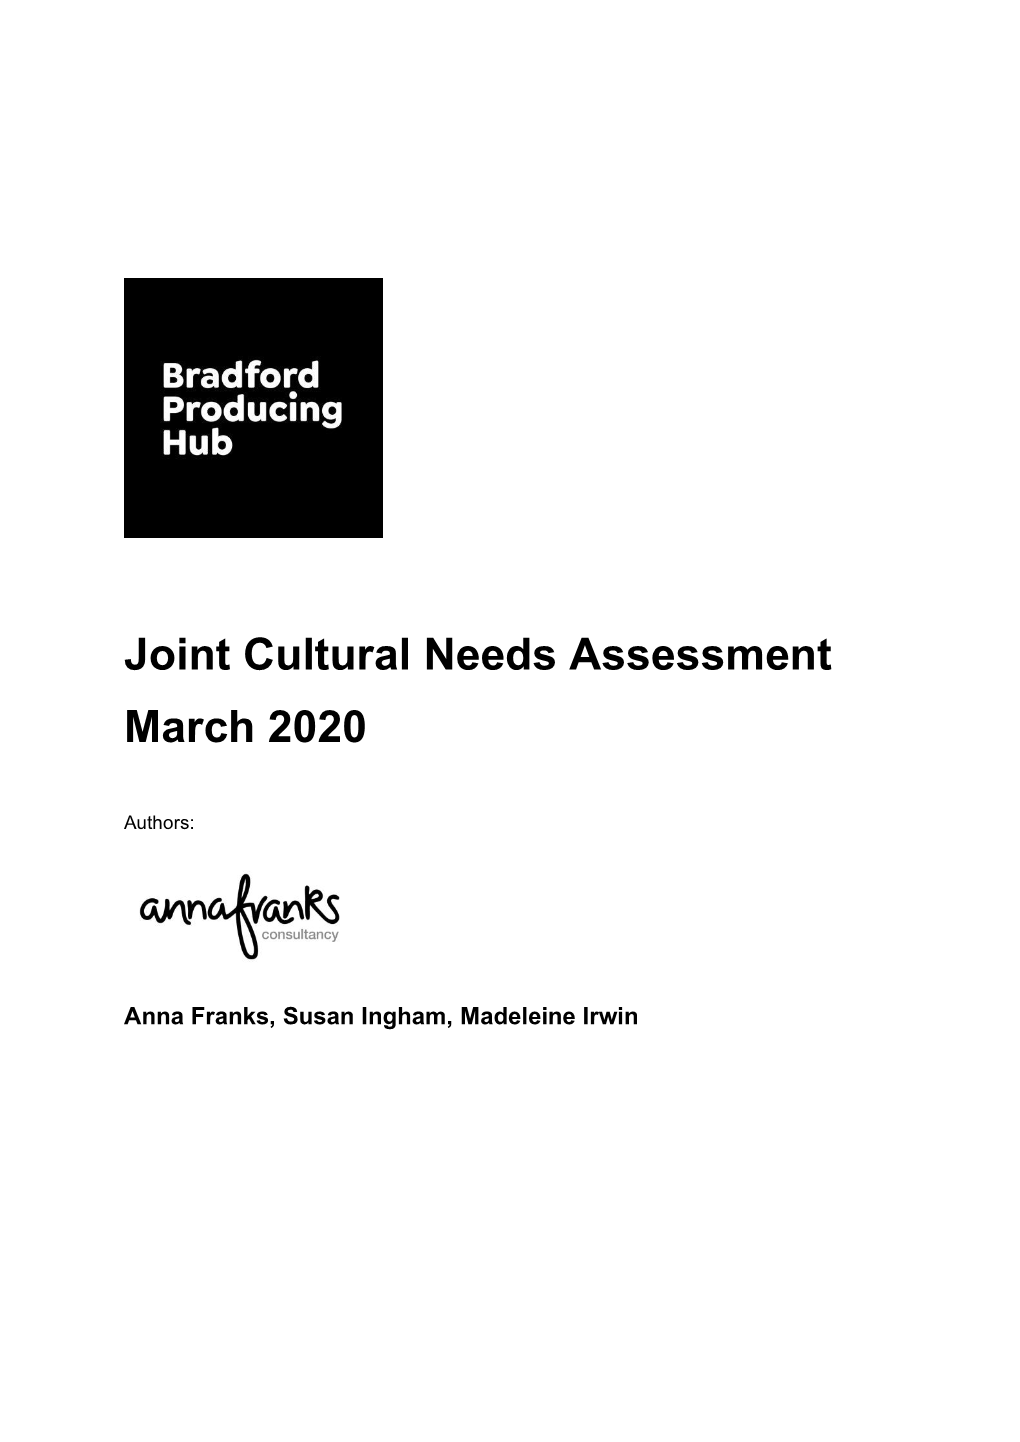 Joint Cultural Needs Assessment March 2020